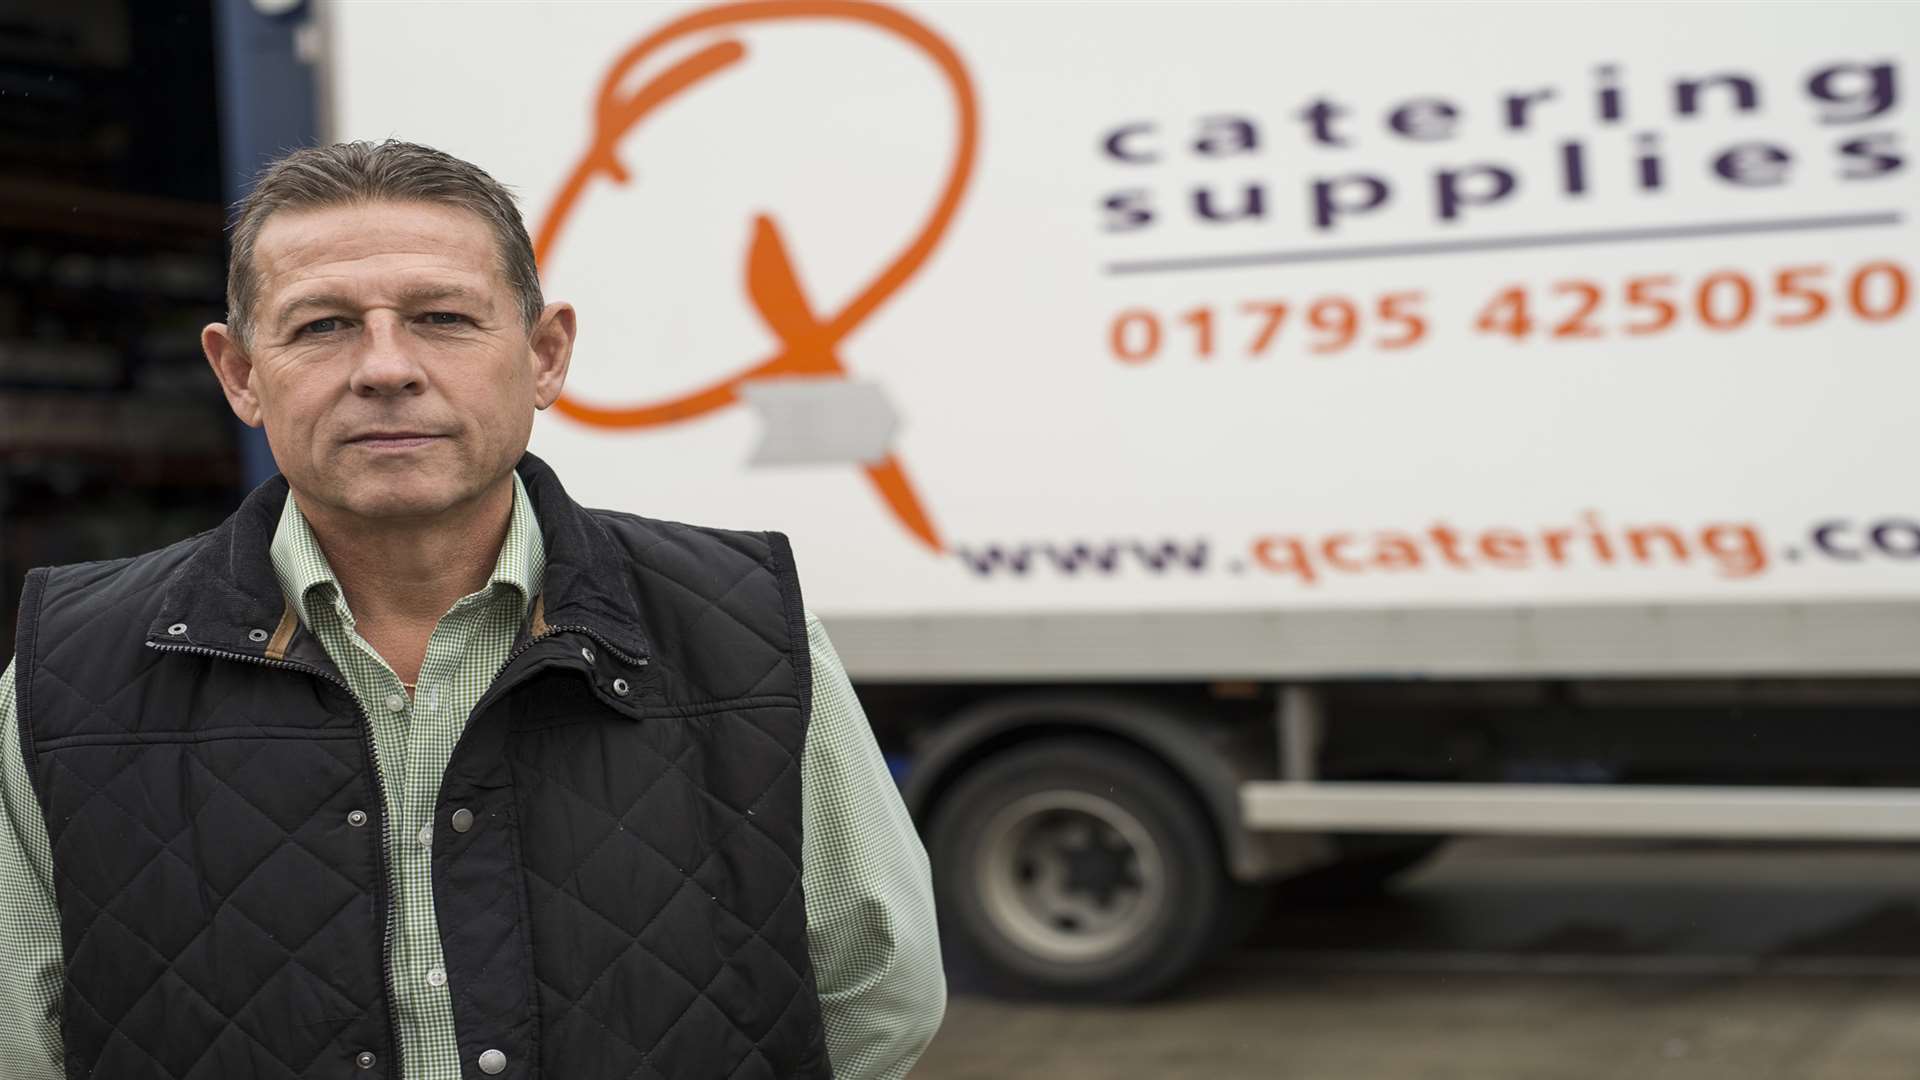 Q Catering managing director Roger Snelling